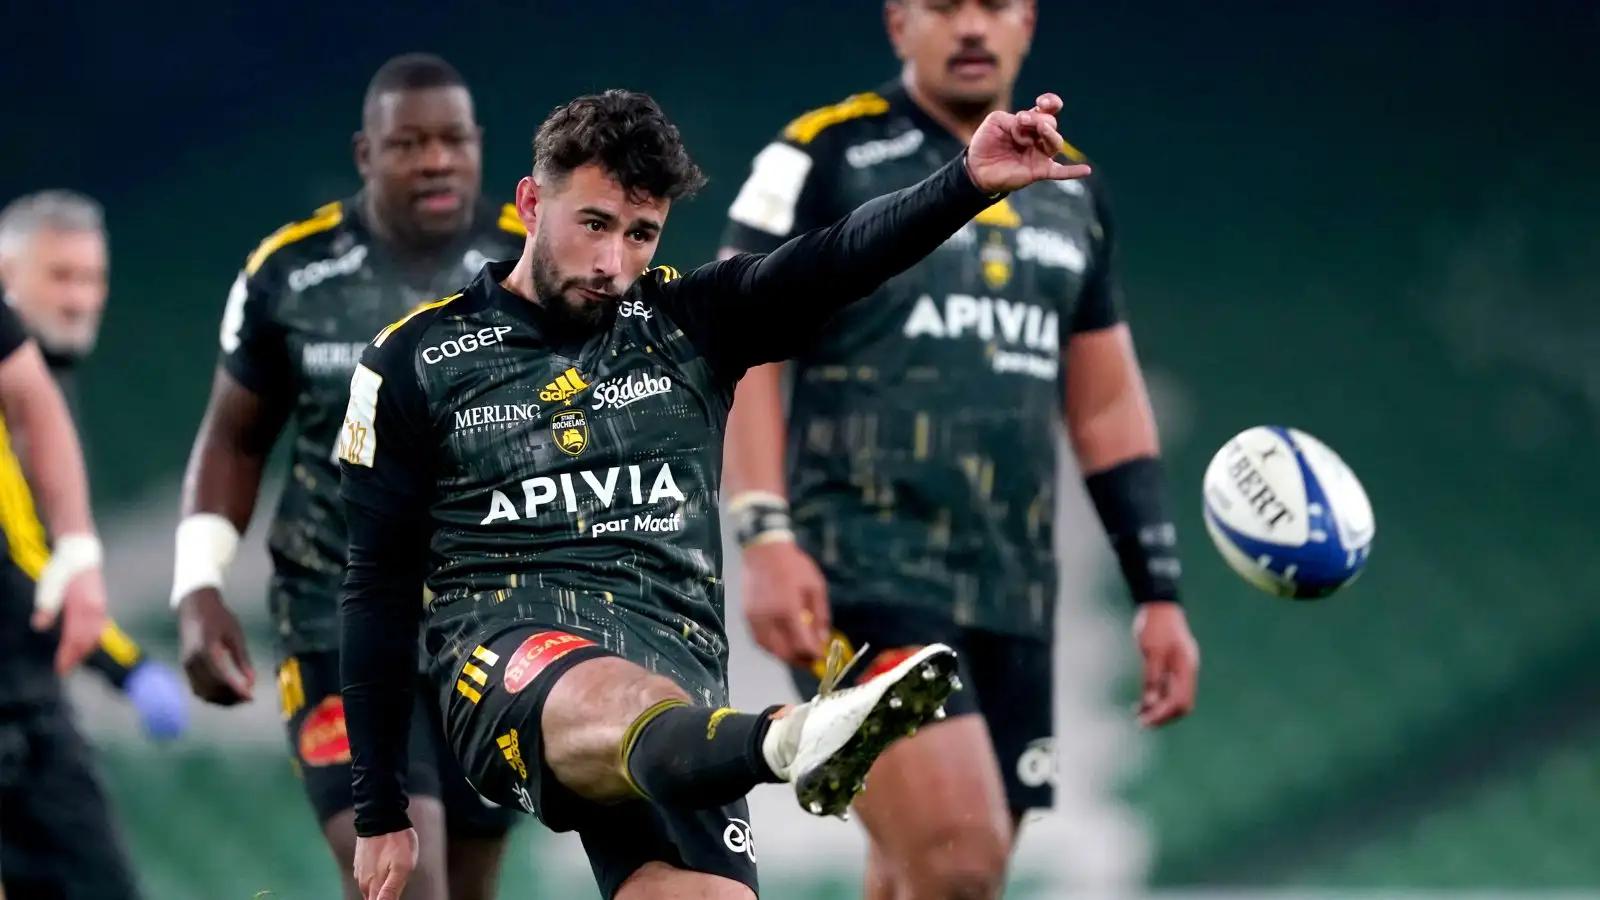 A 26-point masterclass from flyhalf Antoine Hastoy helped La Rochelle record their second win of the Champions Cup, defeating Ulster at the Aviva Stadium.